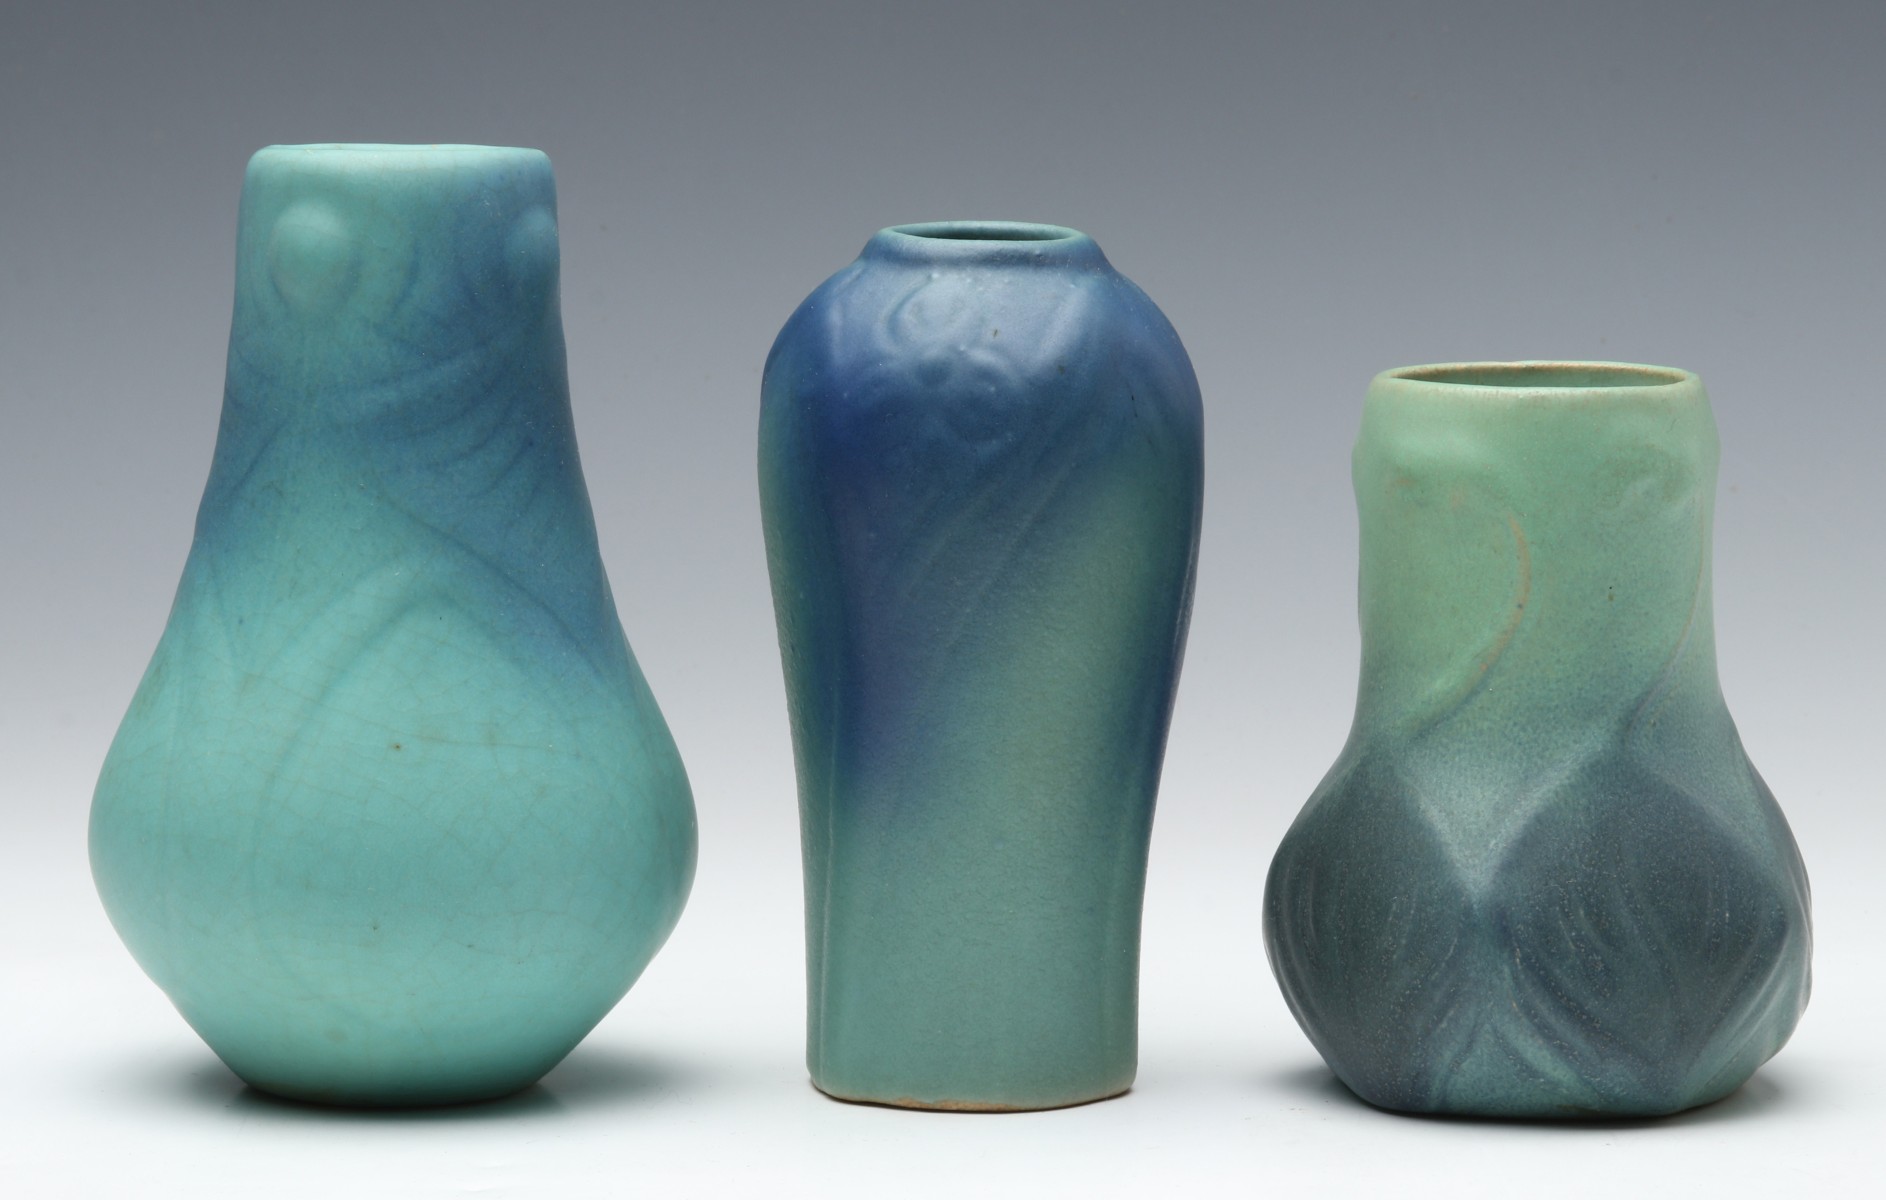 FOUR VAN BRIGGLE ART POTTERY VASES 1930s AND EARLIER